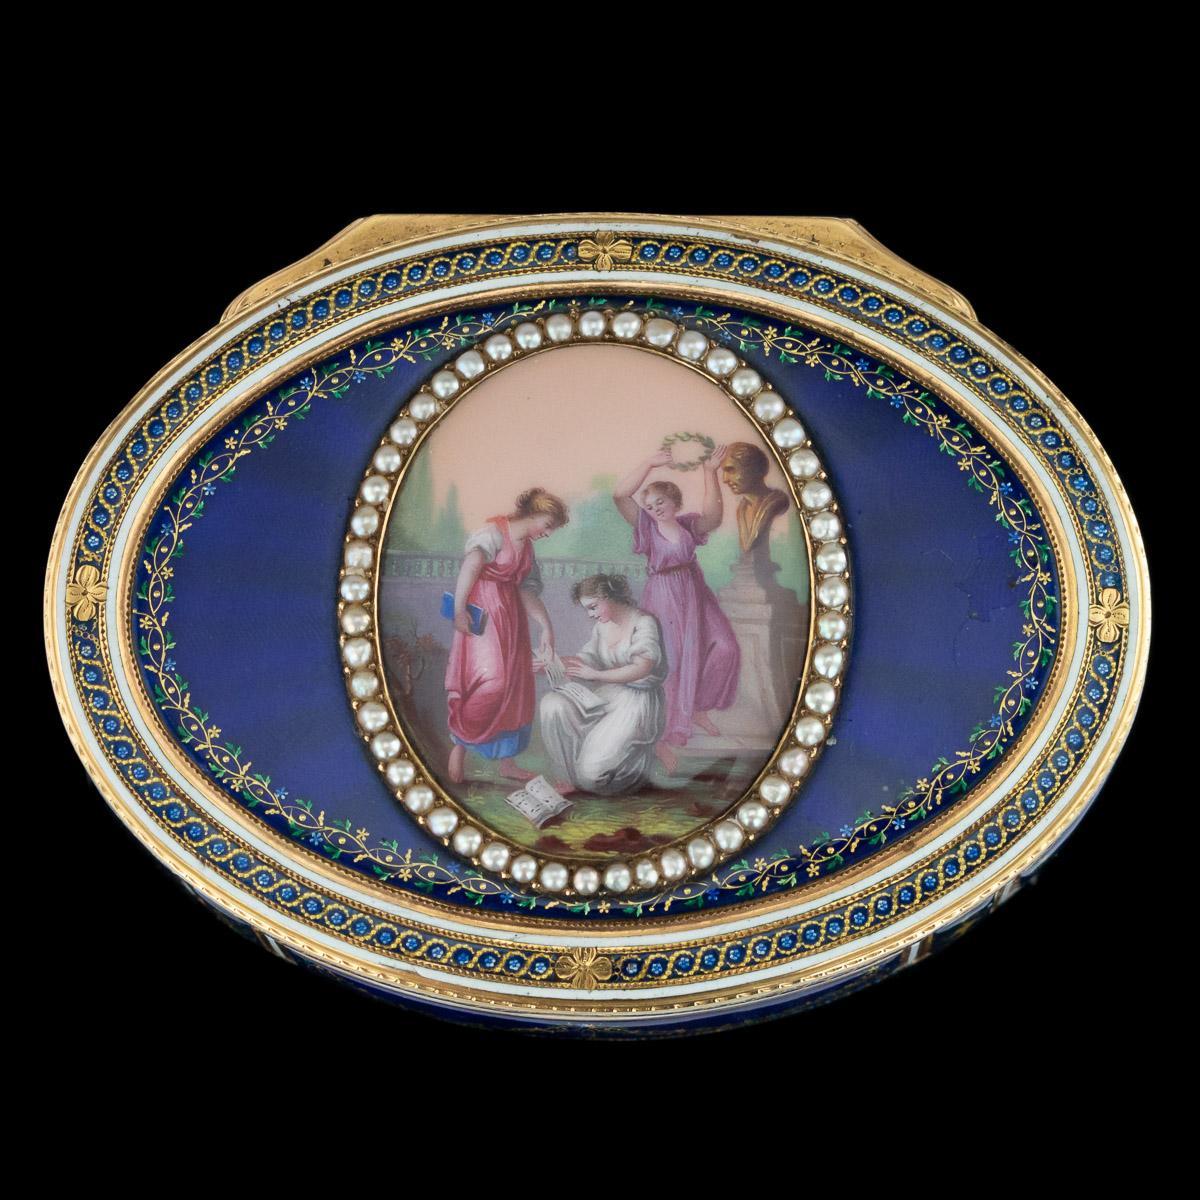 Antique 18th century exceptional French 18-karat gold and enamel snuff box, of oval shape, the lid inset with an oval enamel plaque depicting a classical scene set in a lavish garden, surrounded by a pearl frame, the ground enameled in translucent